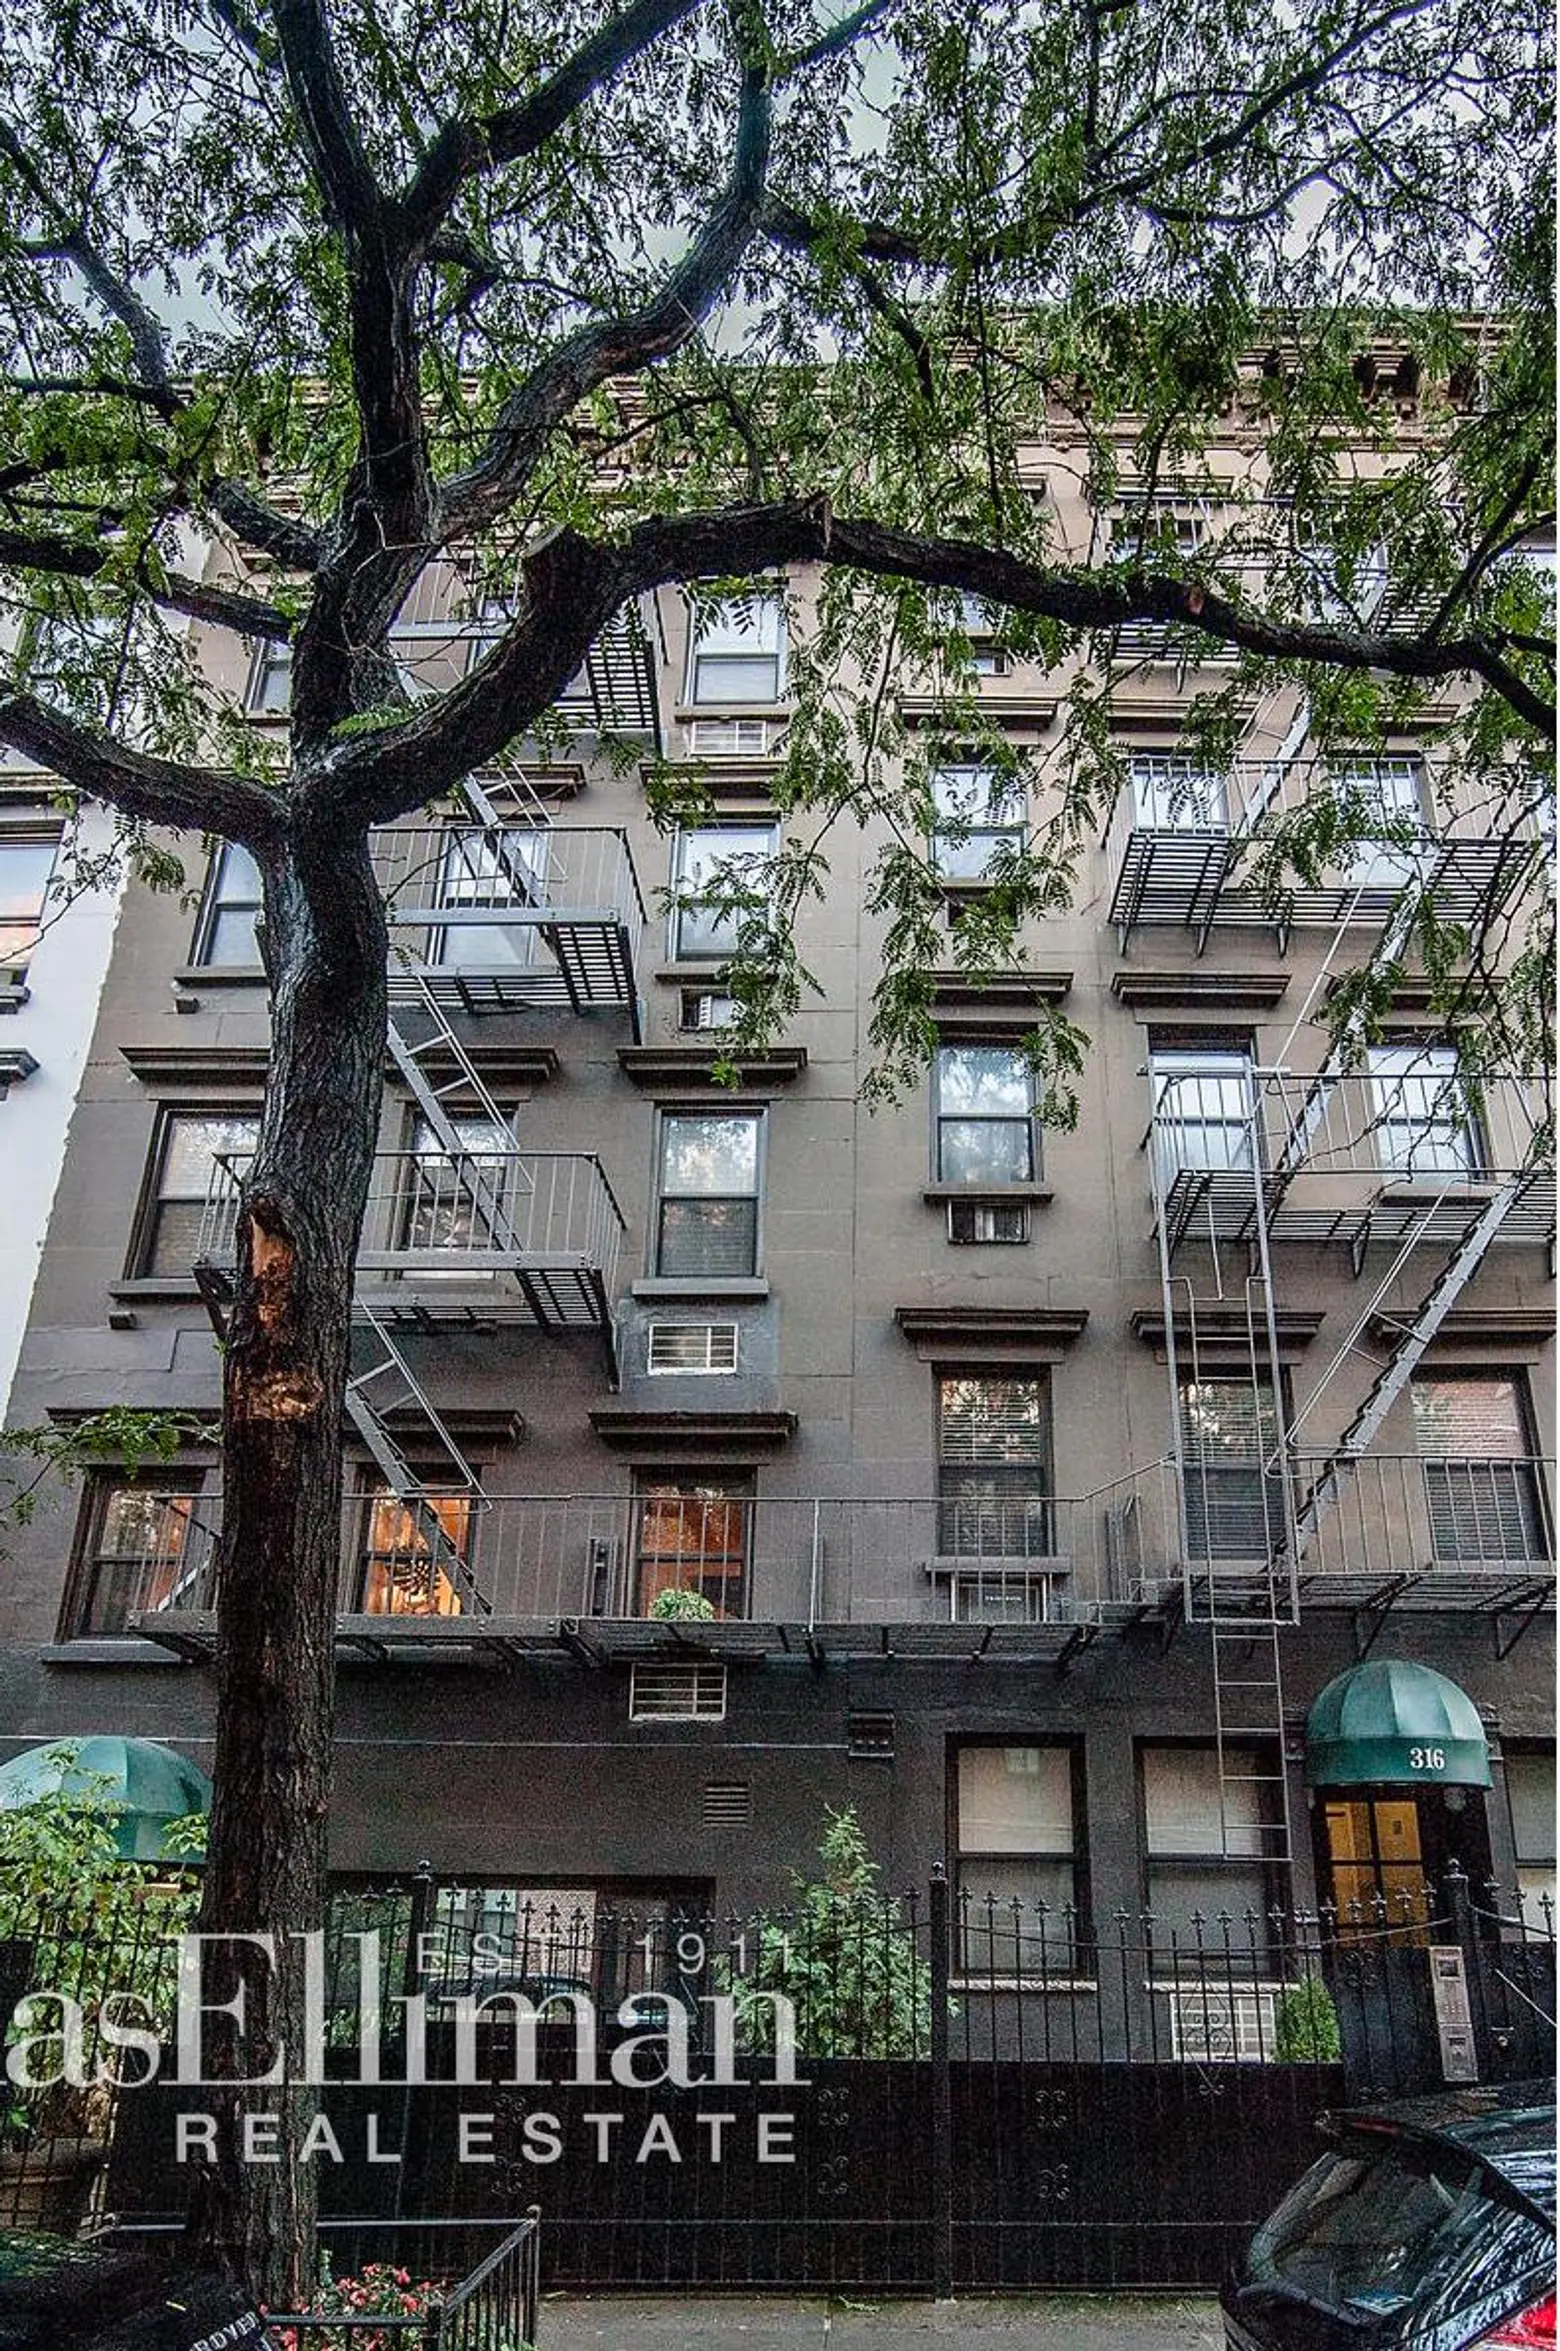 316-318 East 77th Street, Upper East Side, Lions Rock, Lion's Rock, Jones Wood, Historic Homes, multifamily, townhouse, cool listing